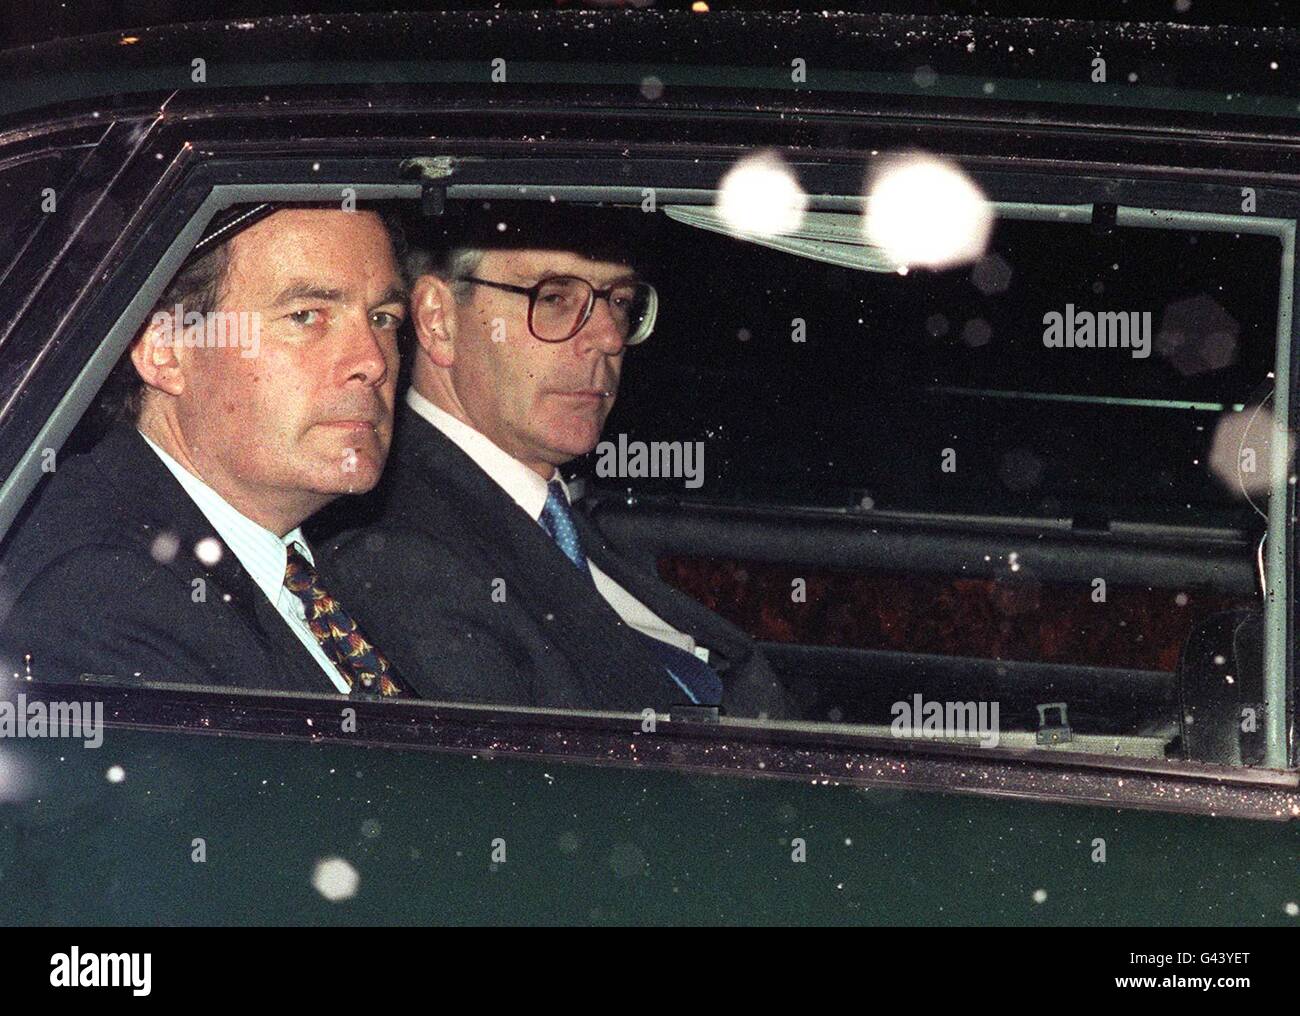 Prime Minister John Major (right) is driven out of Buckingham Palace this evening (Tuesday) in a snow shower following his weekly audience with The Queen. Palace officials were tonight remianing tight-lipped on whether the pair had discussed the future role for the Princess of Wales. **MAN ON LEFT UN-IDENTIFIED** Stock Photo